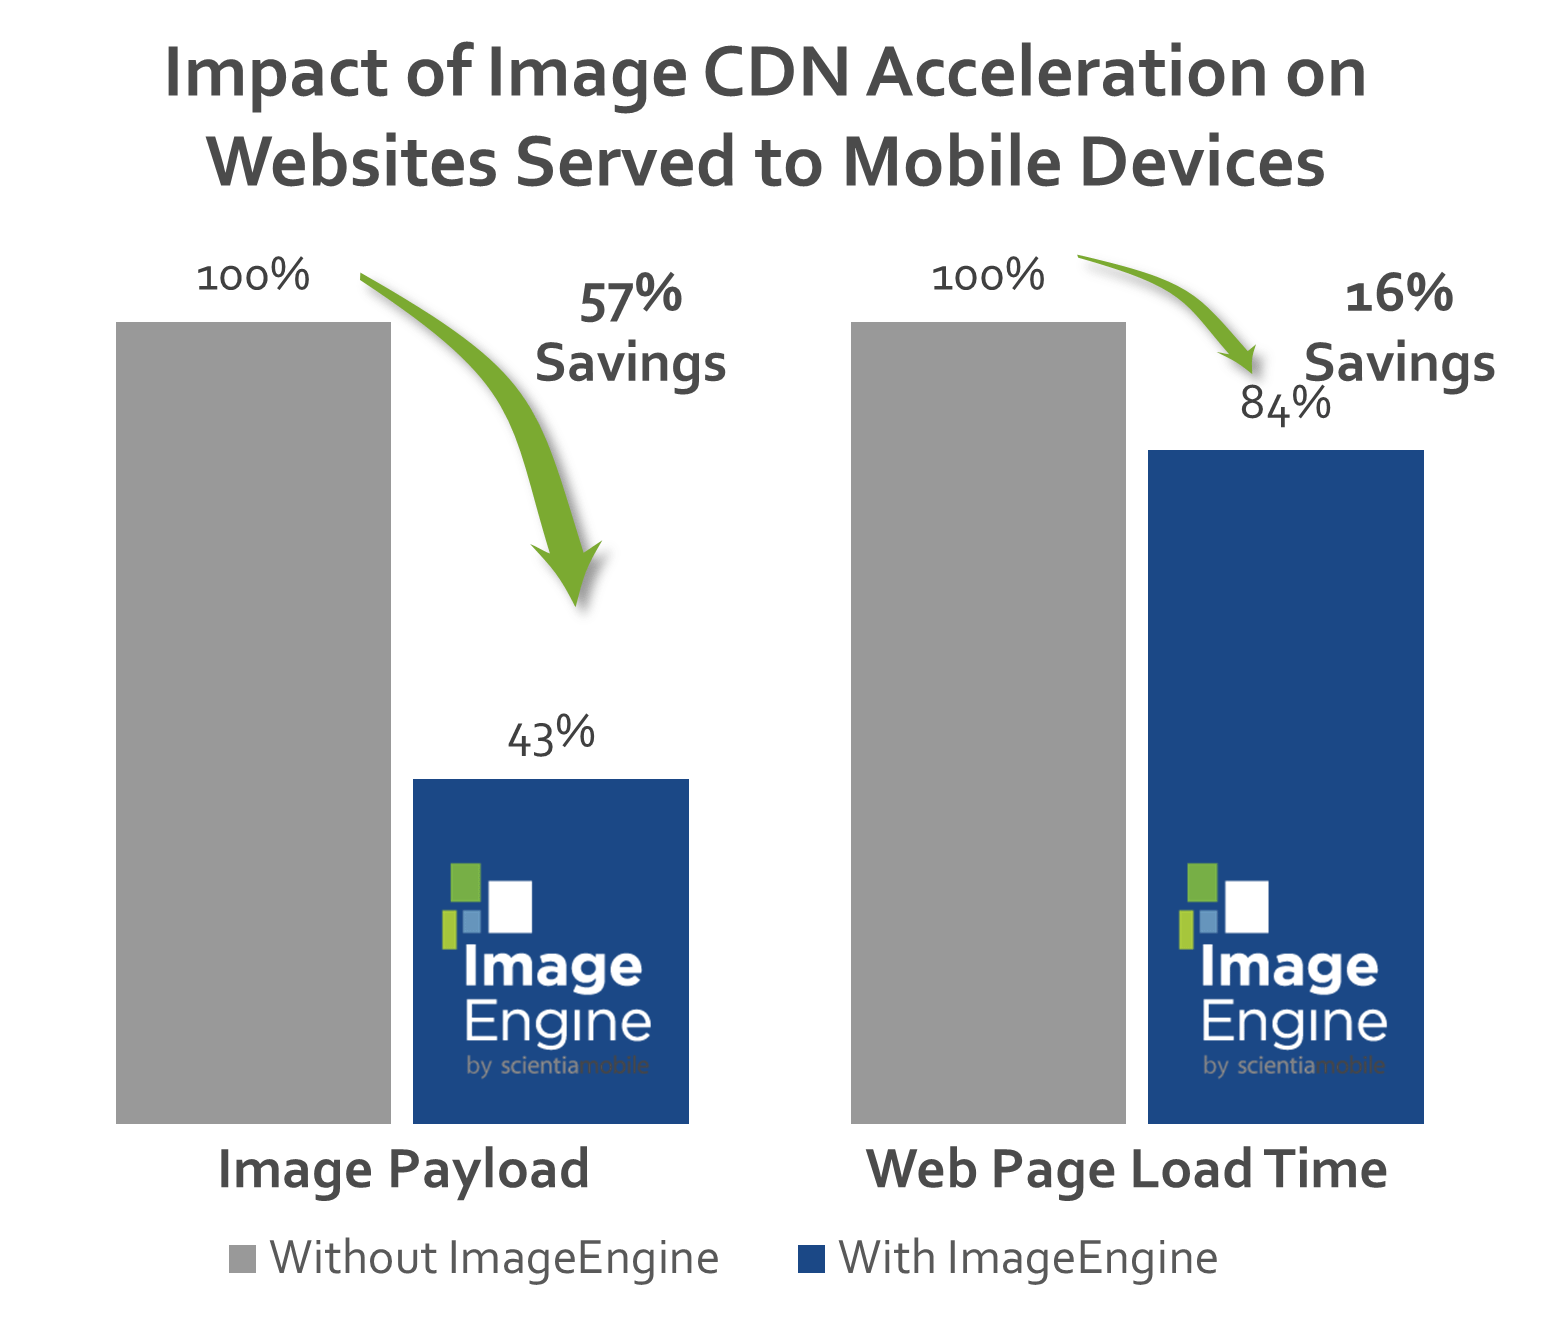 Reduce Image payload